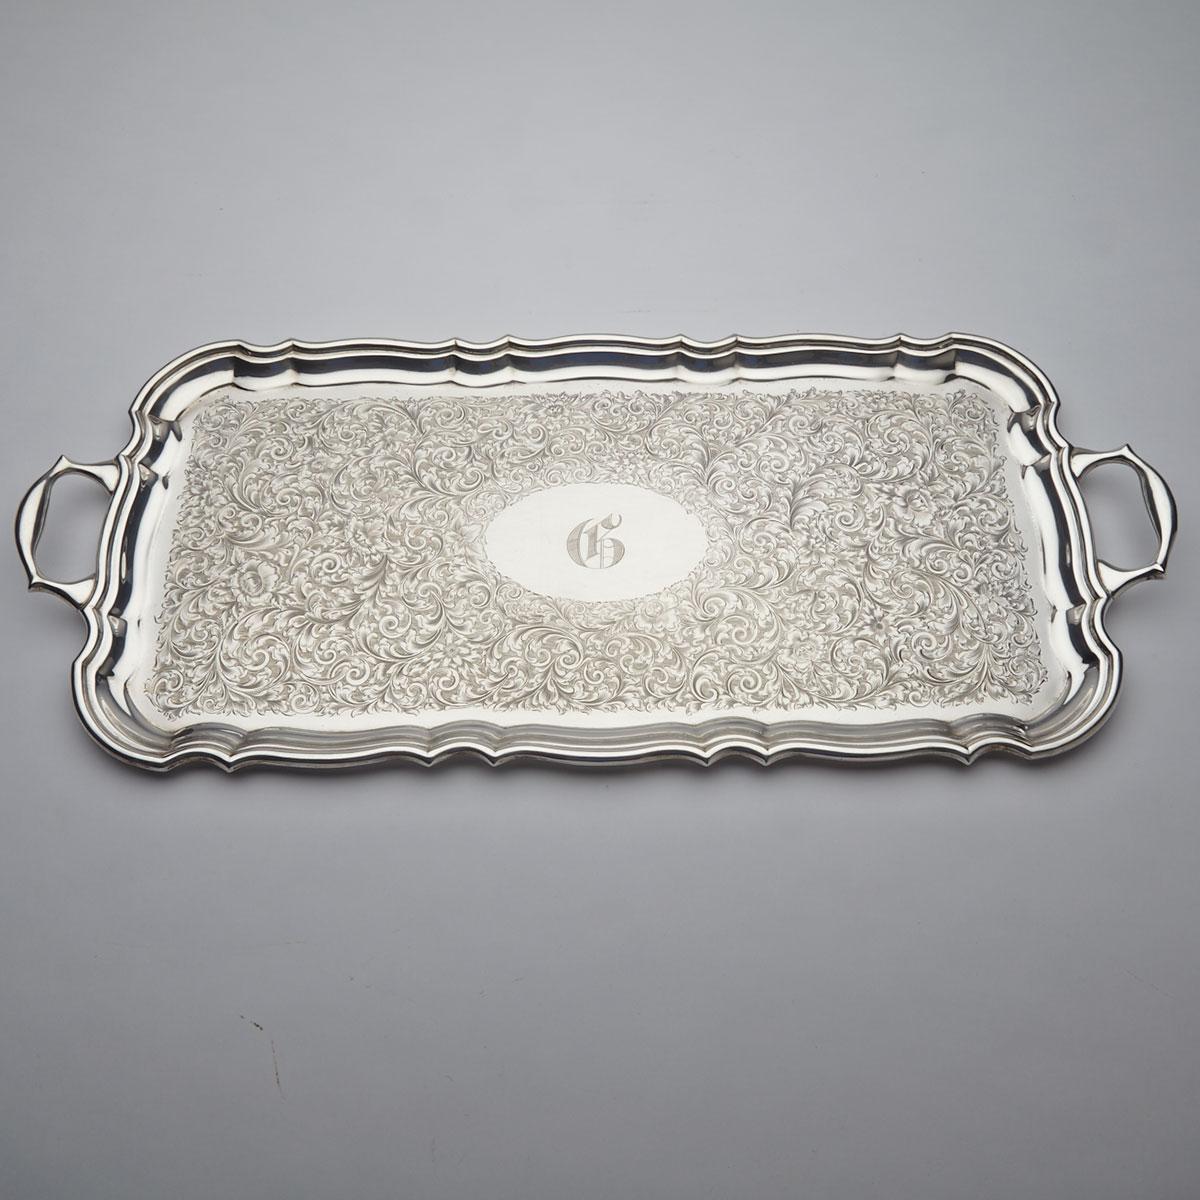 Canadian Silver Cocktail Tray, Henry Birks & Sons, Montreal, Que., 1929